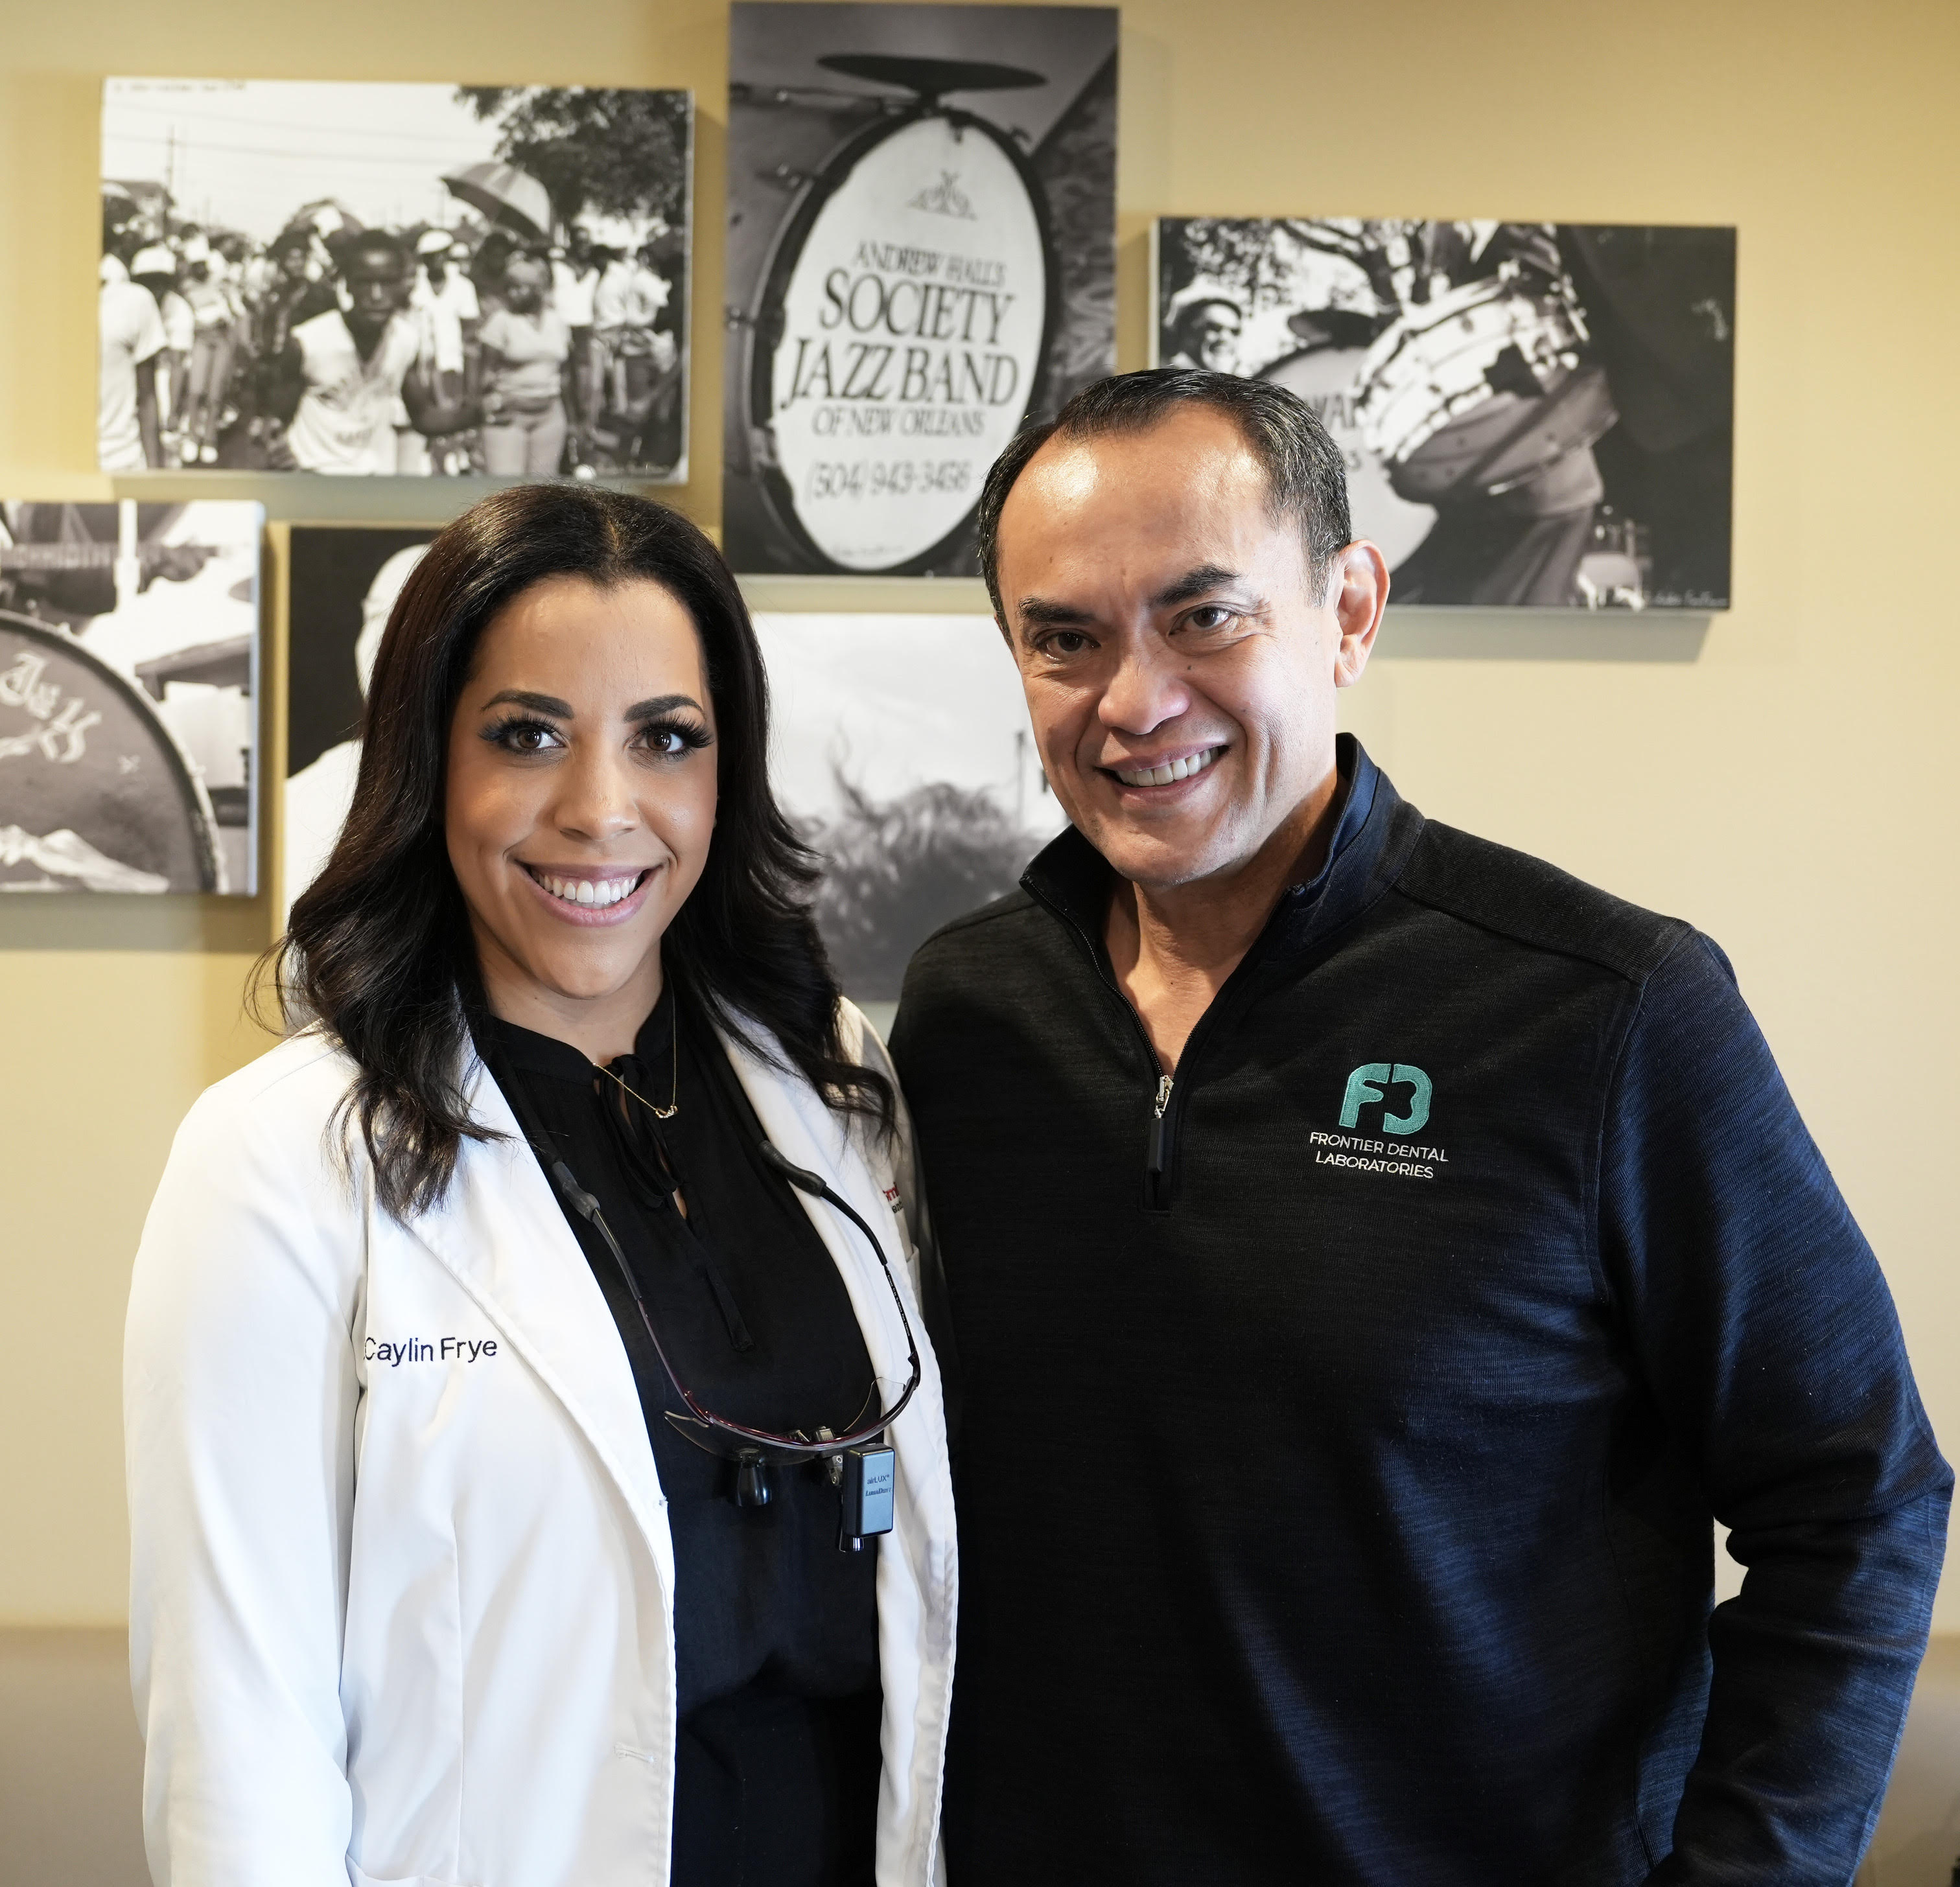 Frontier Dental Lab’s Direct-to-Consumer Marketing Connects Dentists and Patients